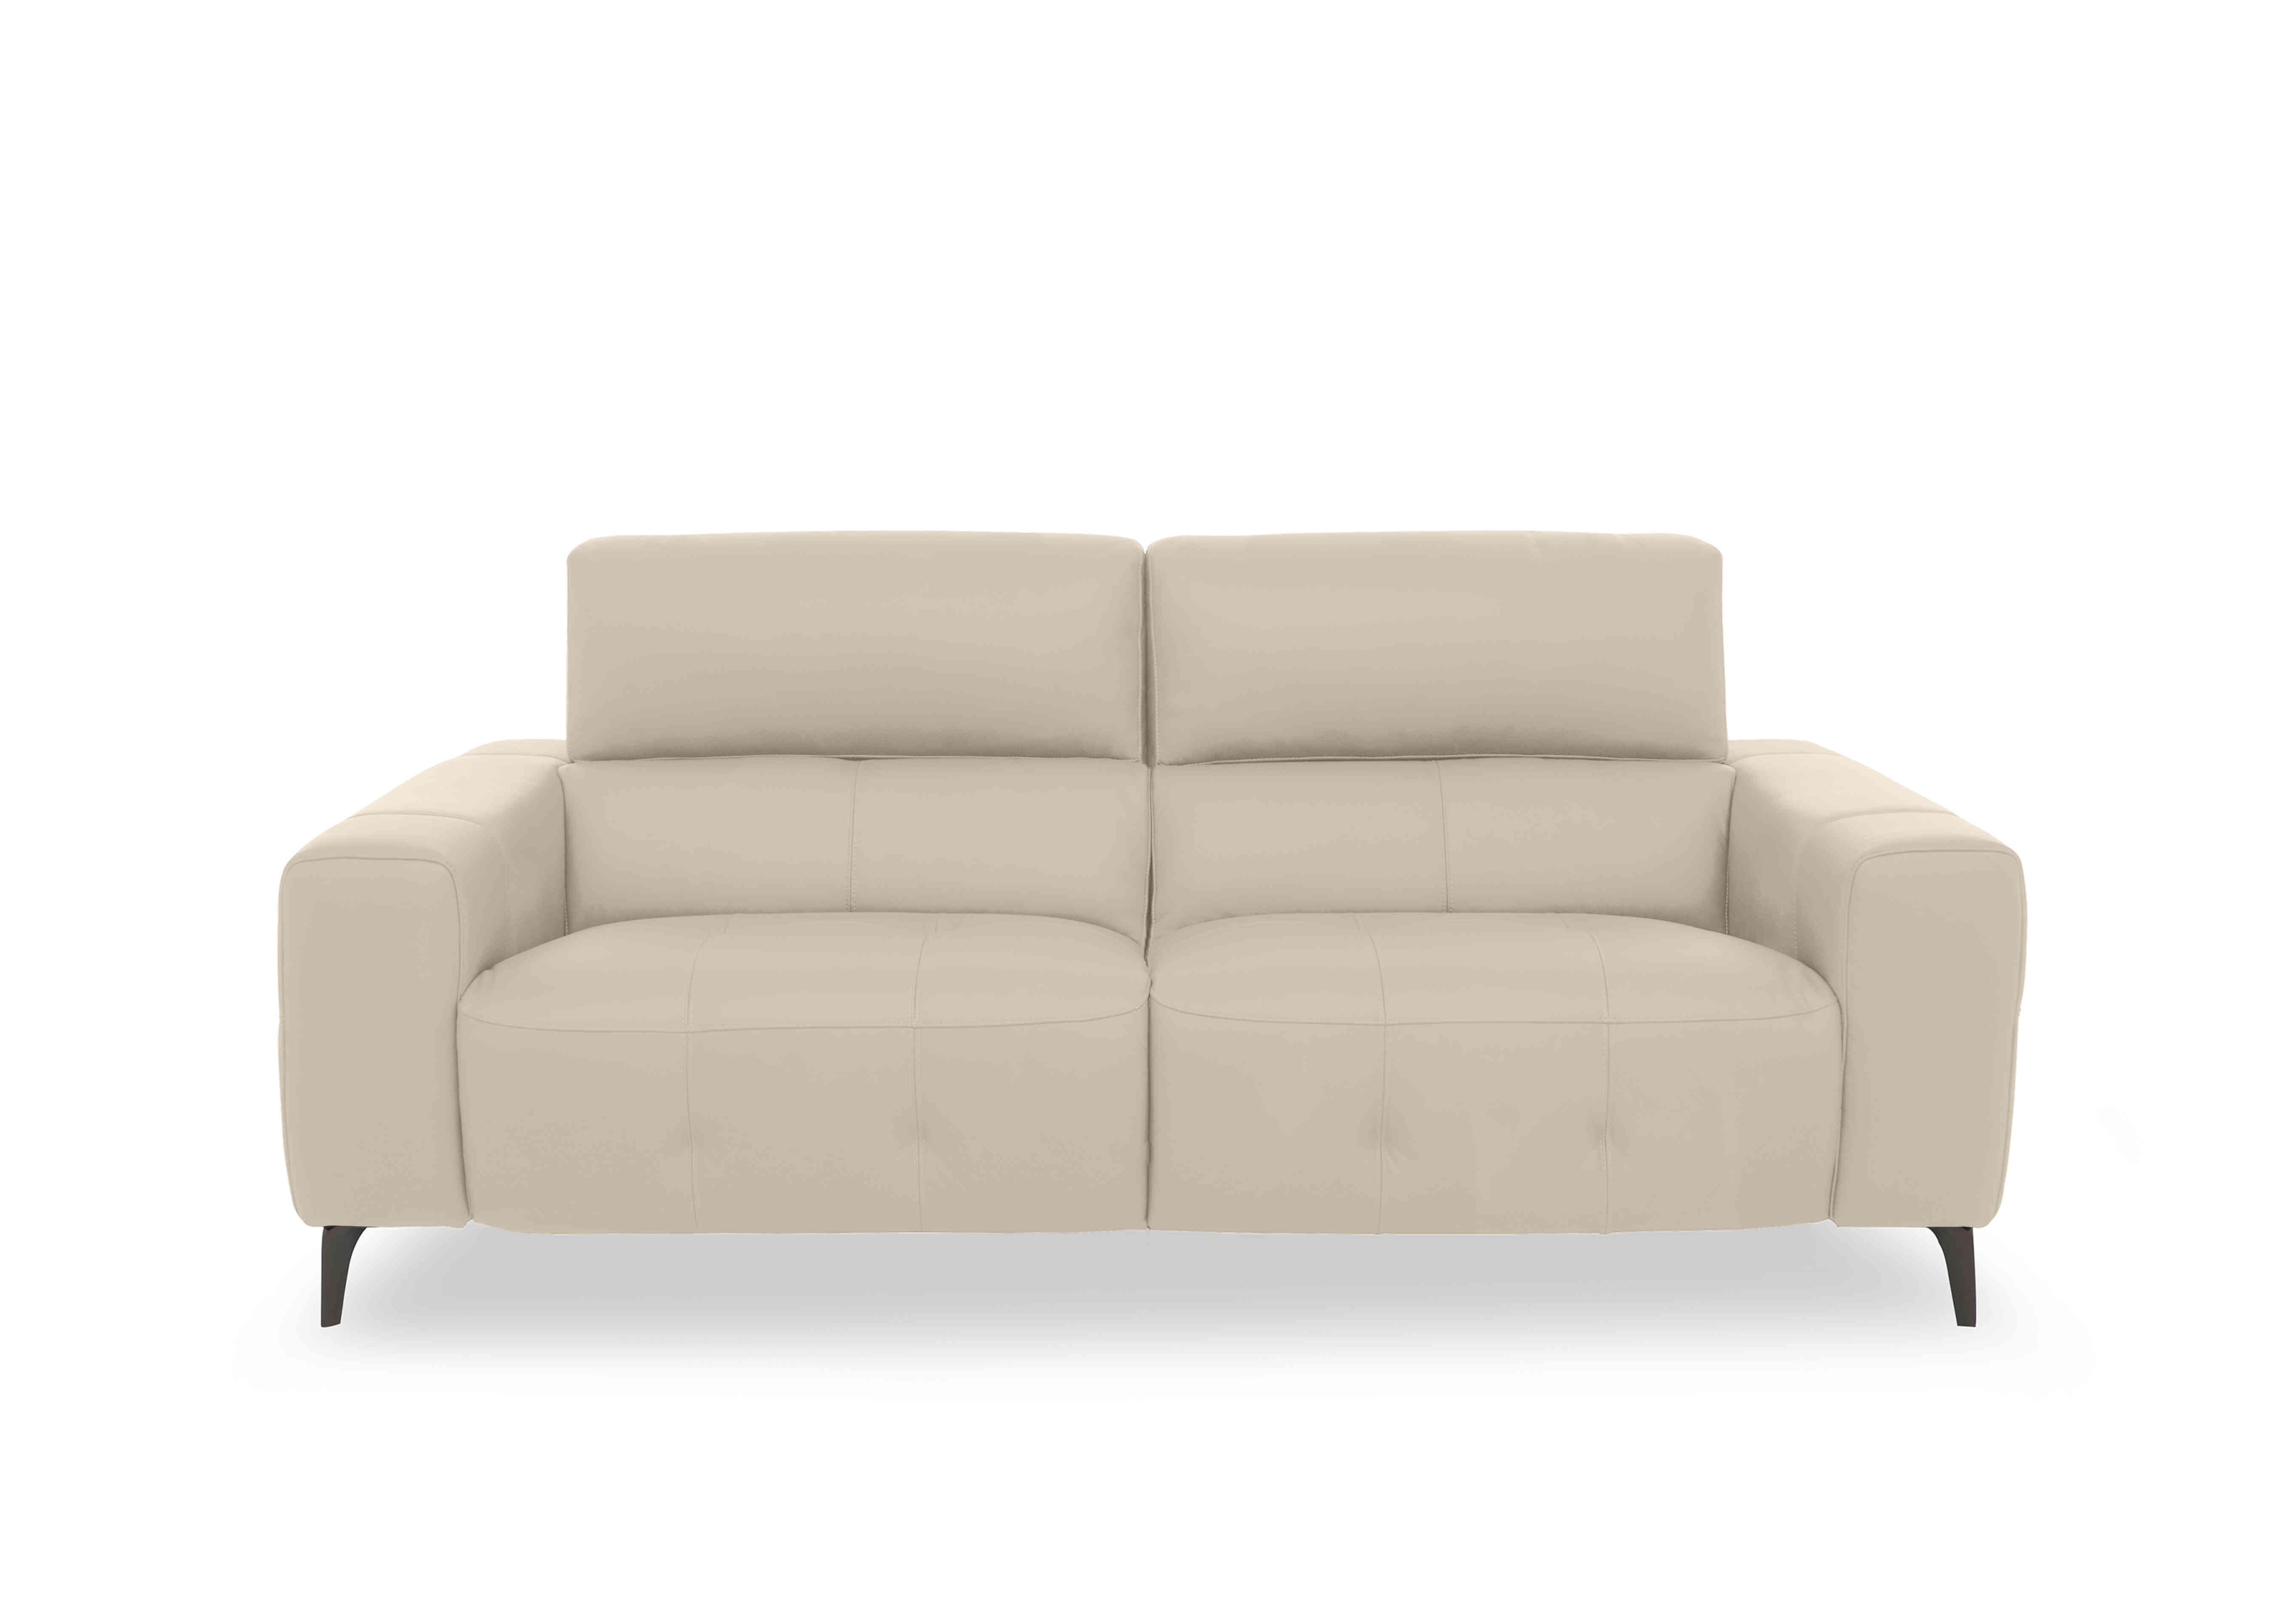 New York 3 Seater Leather Sofa in Bv-862c Bisque on Furniture Village